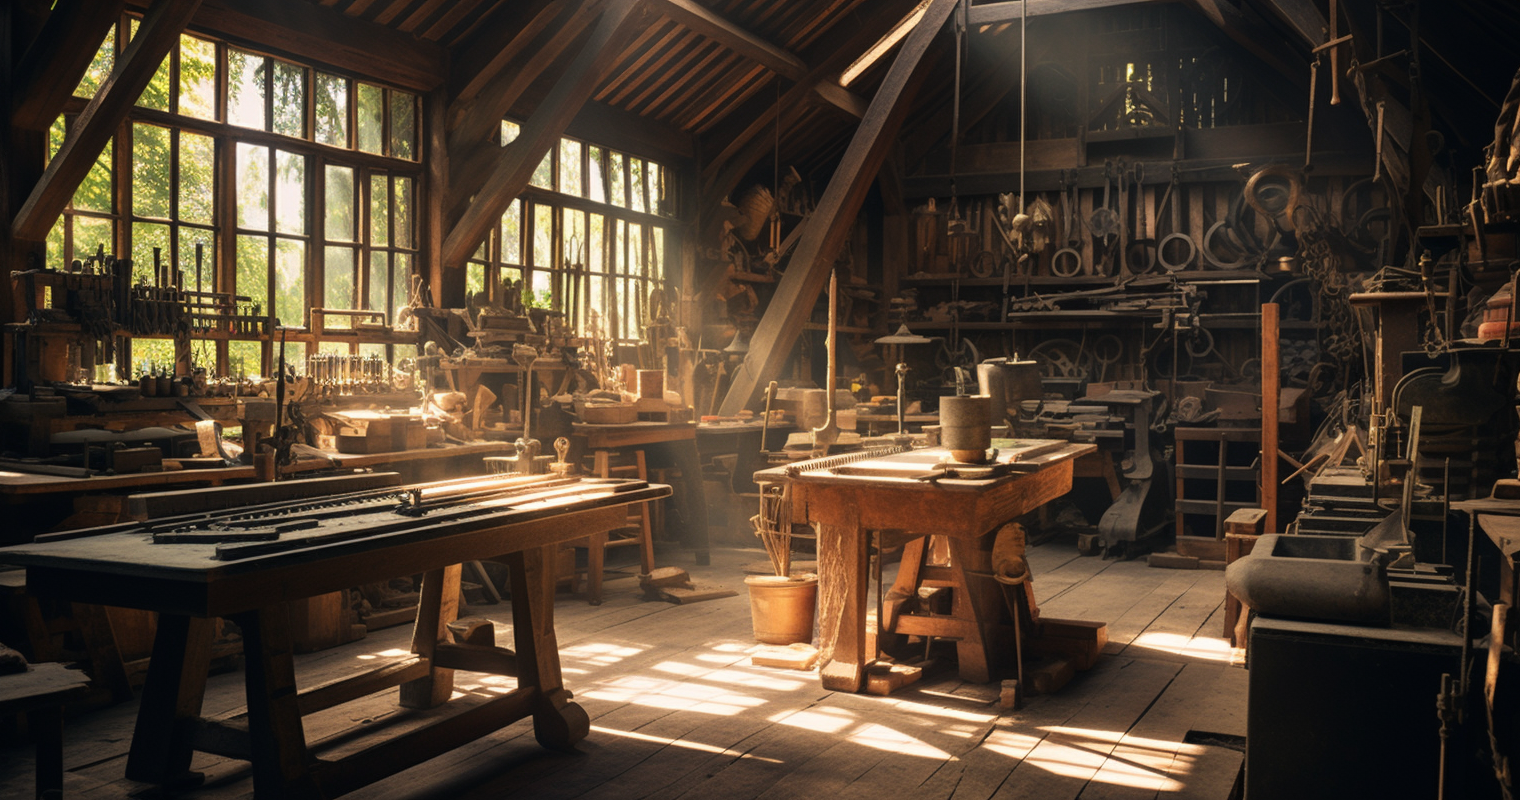 Carpenter's Workshop with Vintage Tools and Sunlight